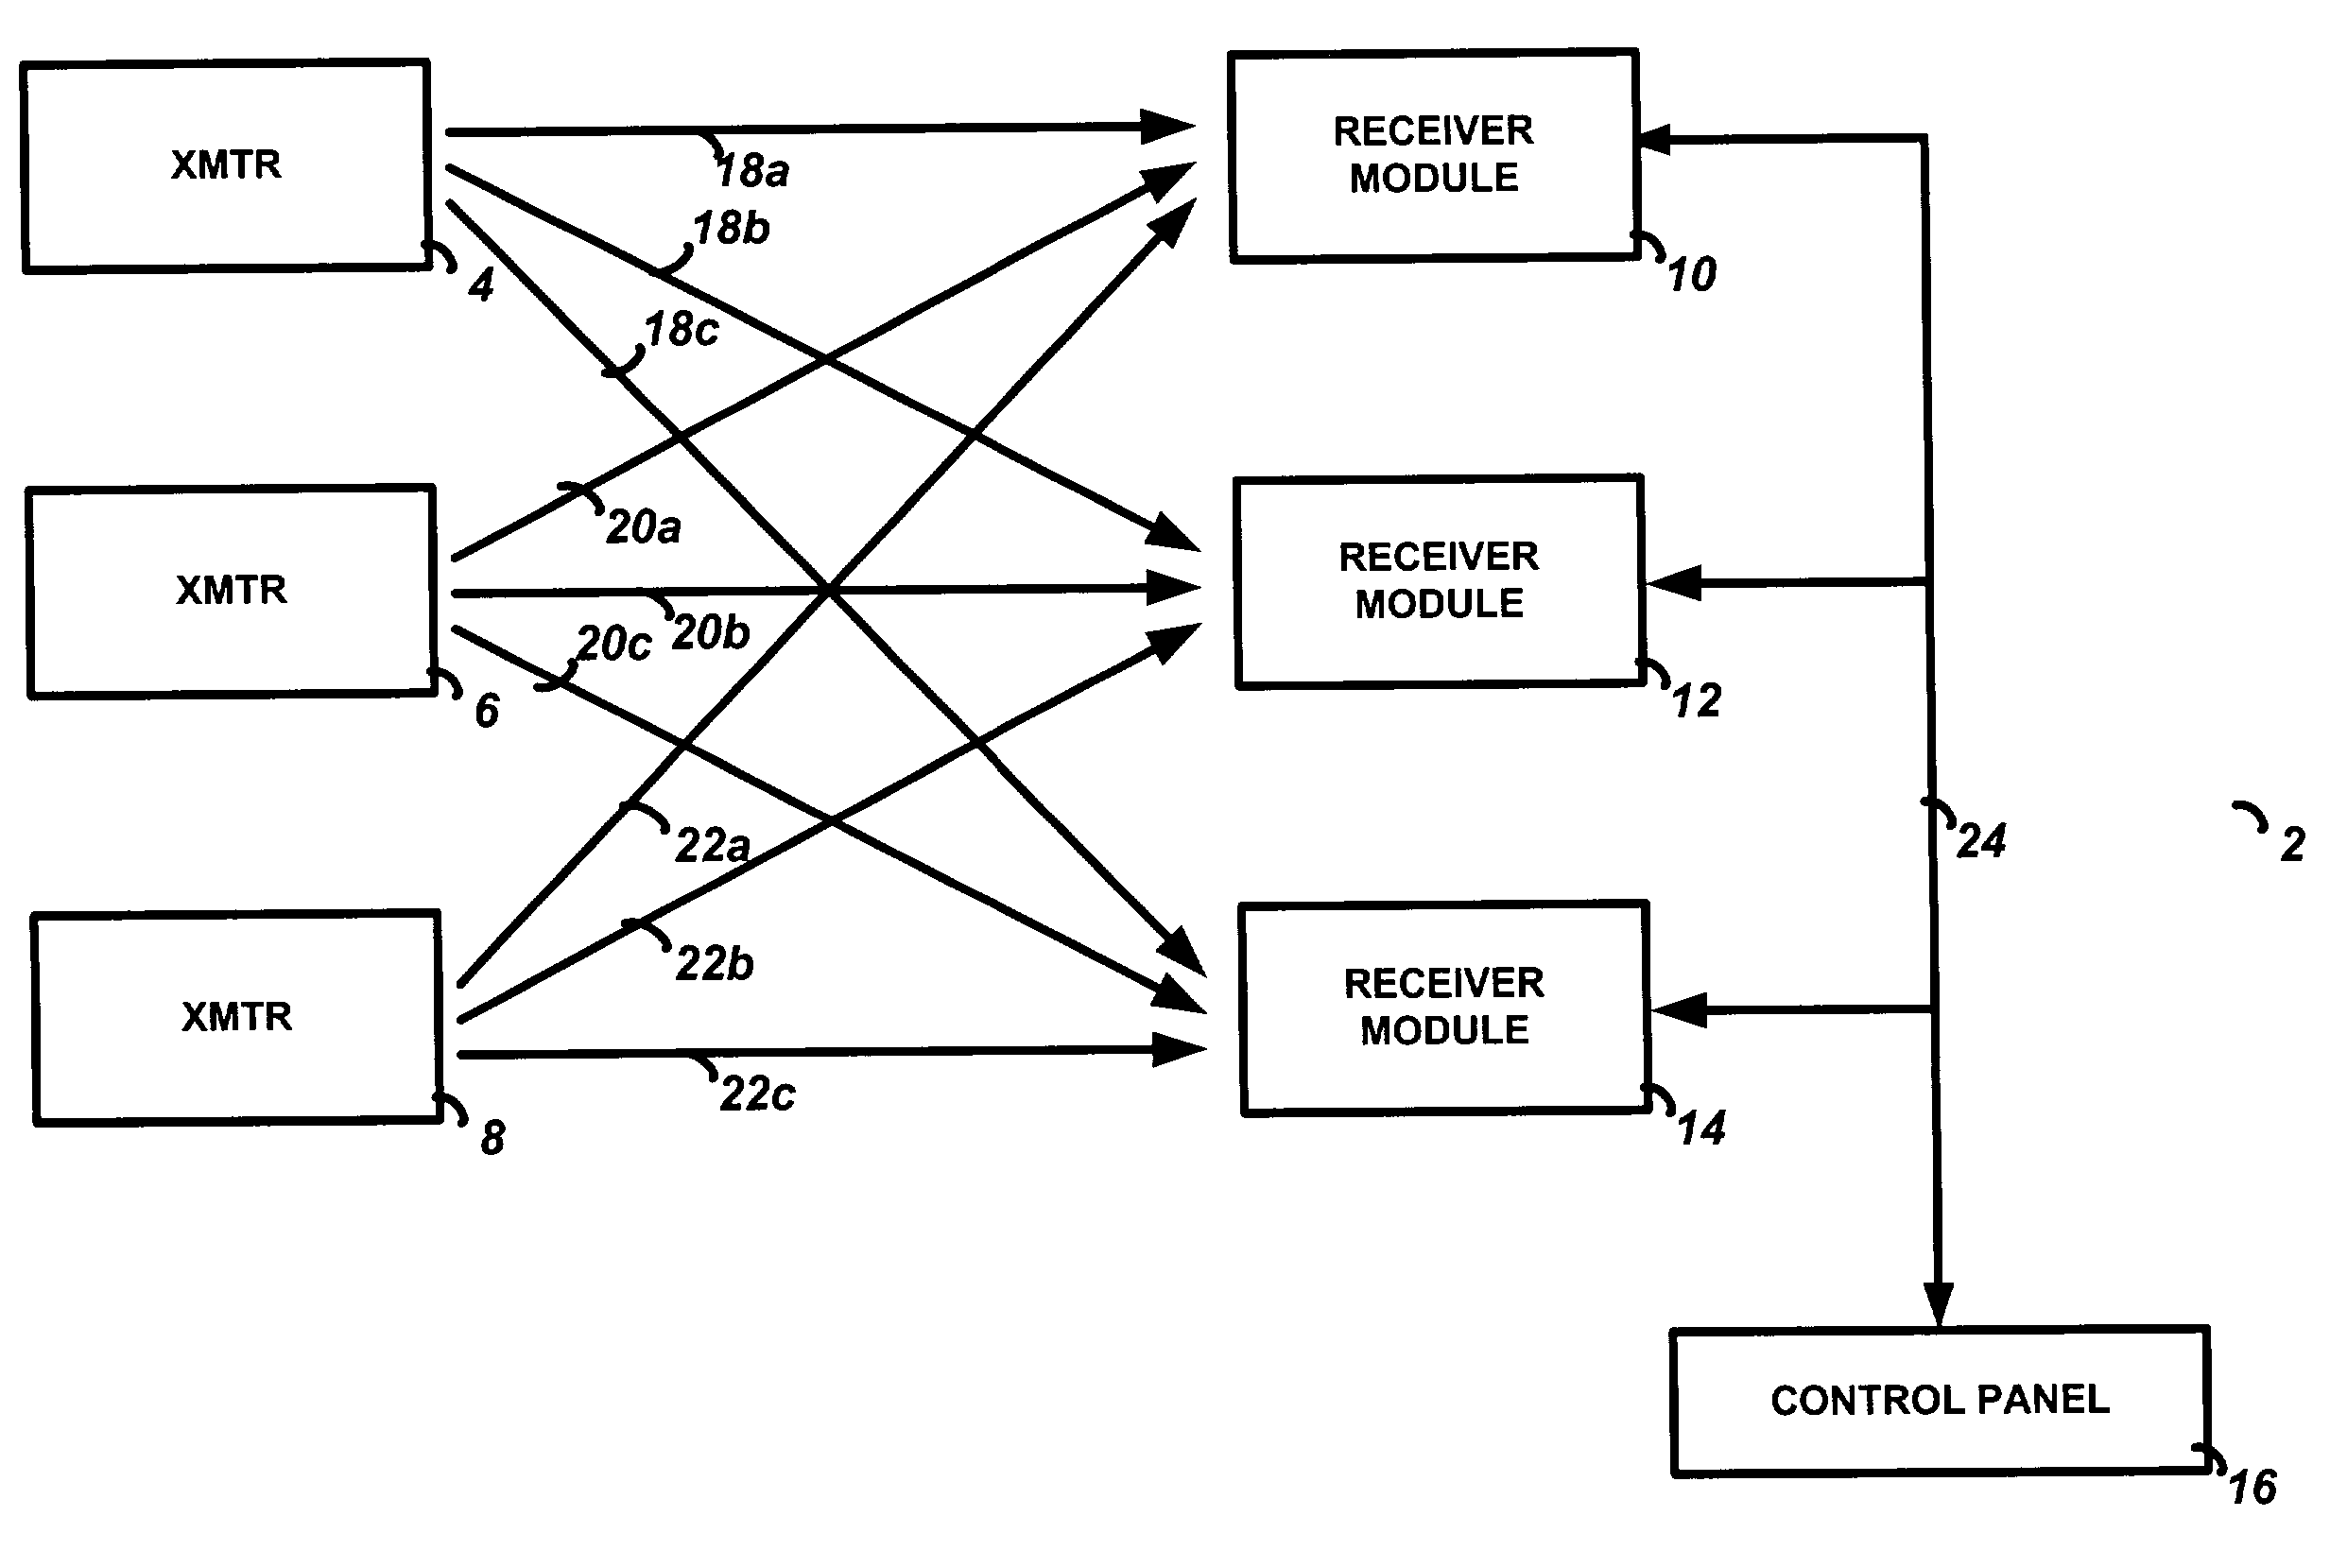 Method and apparatus for determining message response type in a security system